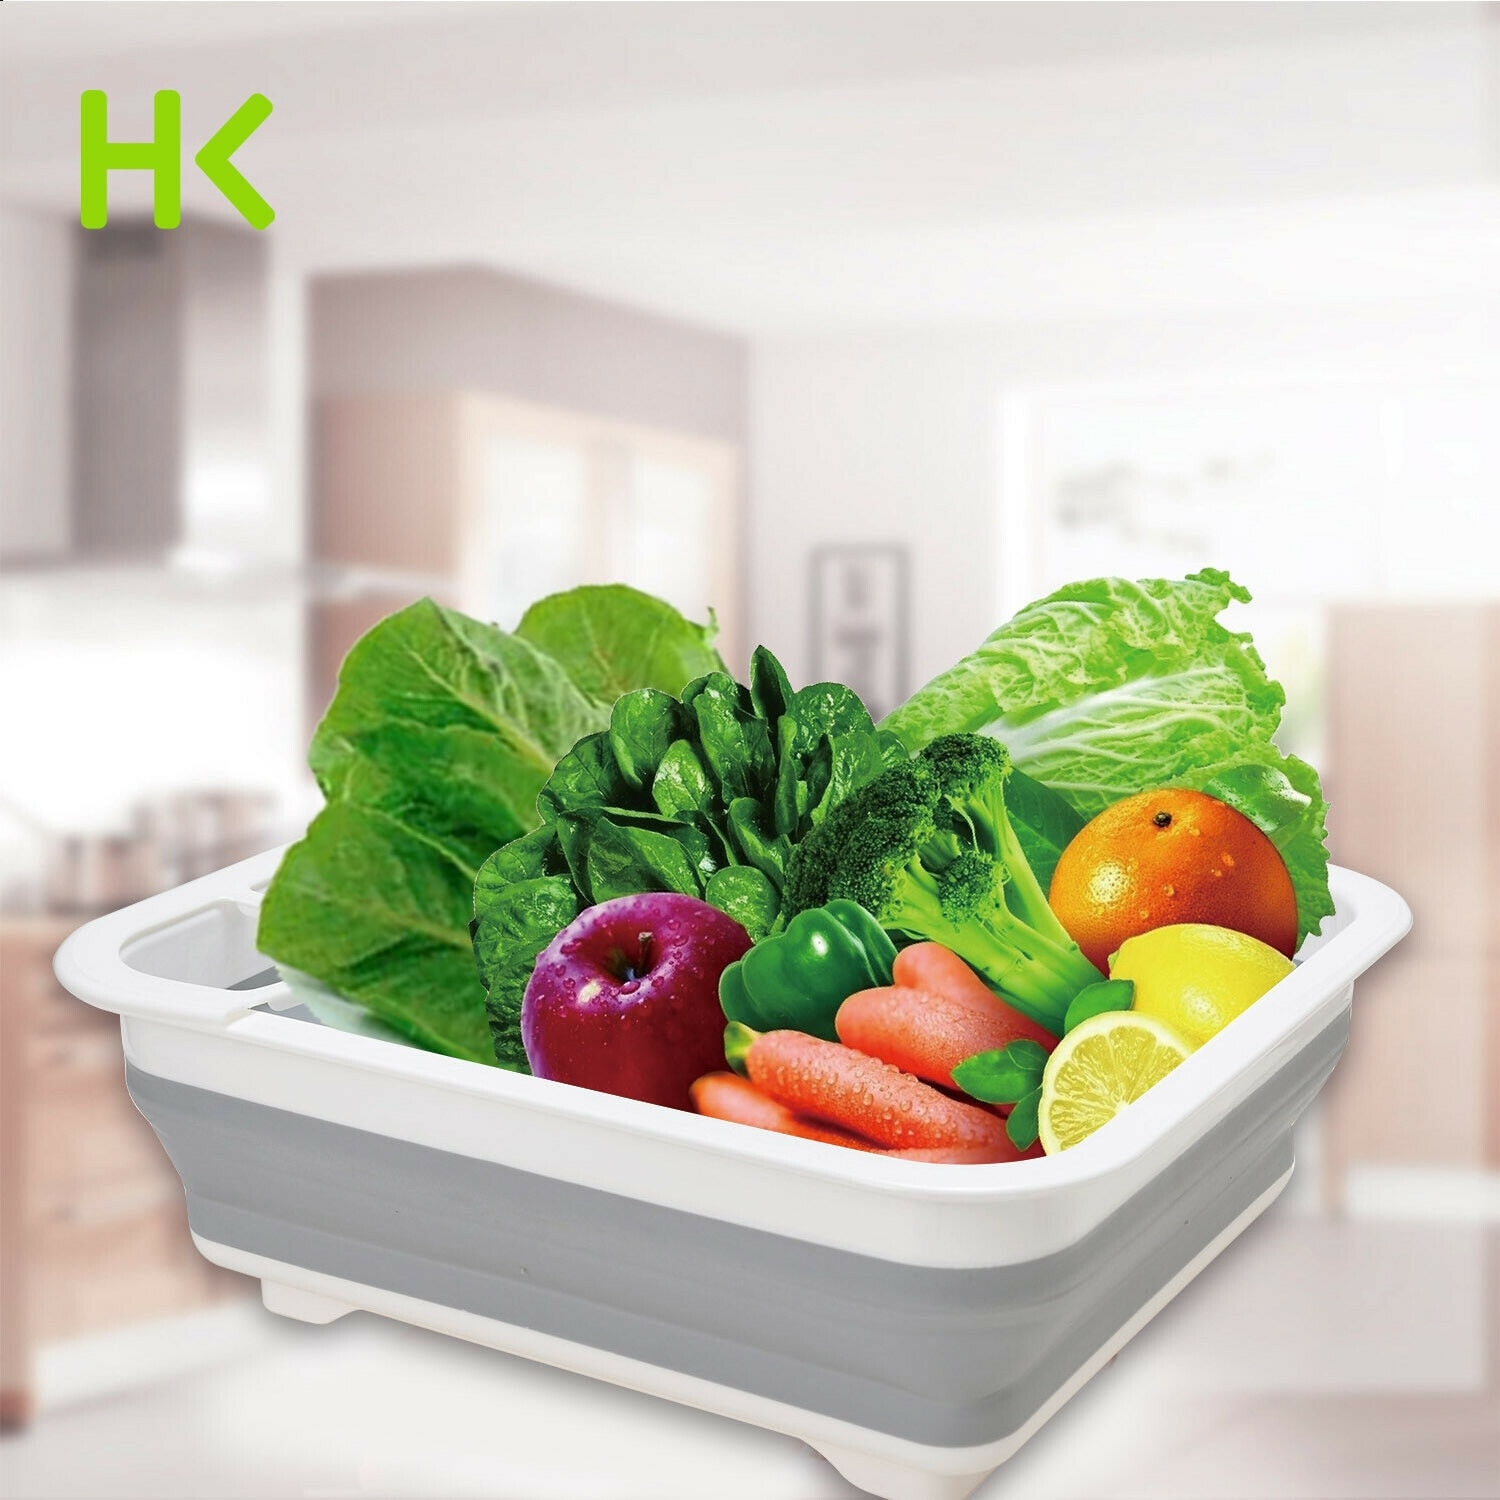 https://ak1.ostkcdn.com/images/products/is/images/direct/01fdbc2e0a01d5747aee00e175ca69157721d209/Foldable-Dish-Drying-Rack-Dish-Drainer-w-Utensil-Holder---L.jpg